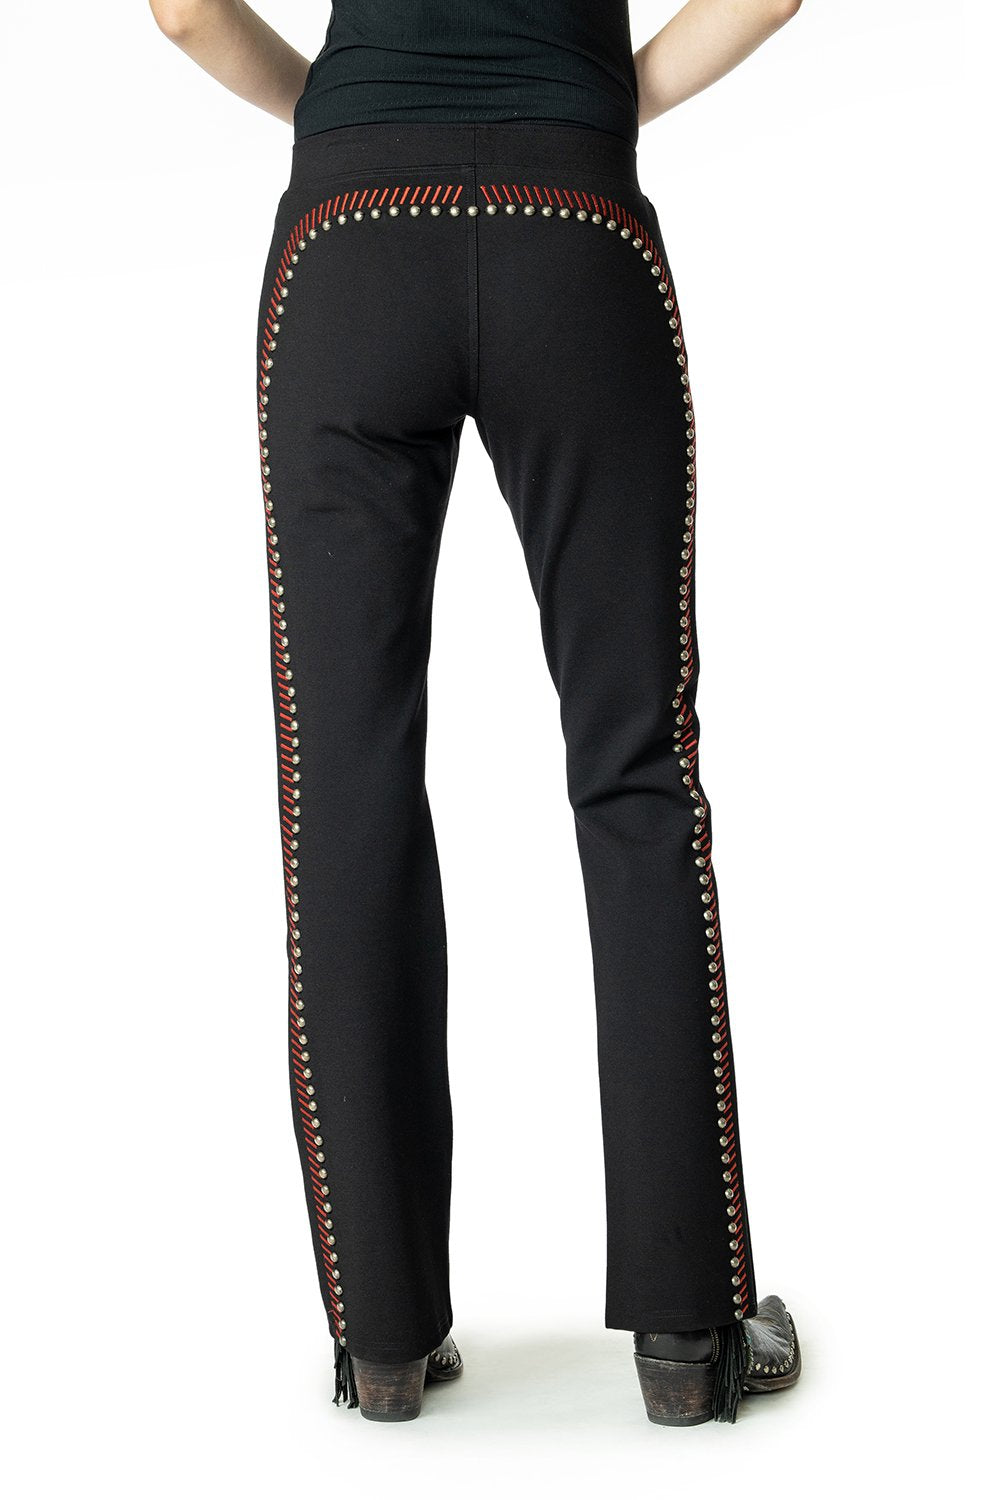 Double D Ranch Long Black Train Pant in Racehorse Red6Whiskey Nashville Fall 2020 P478